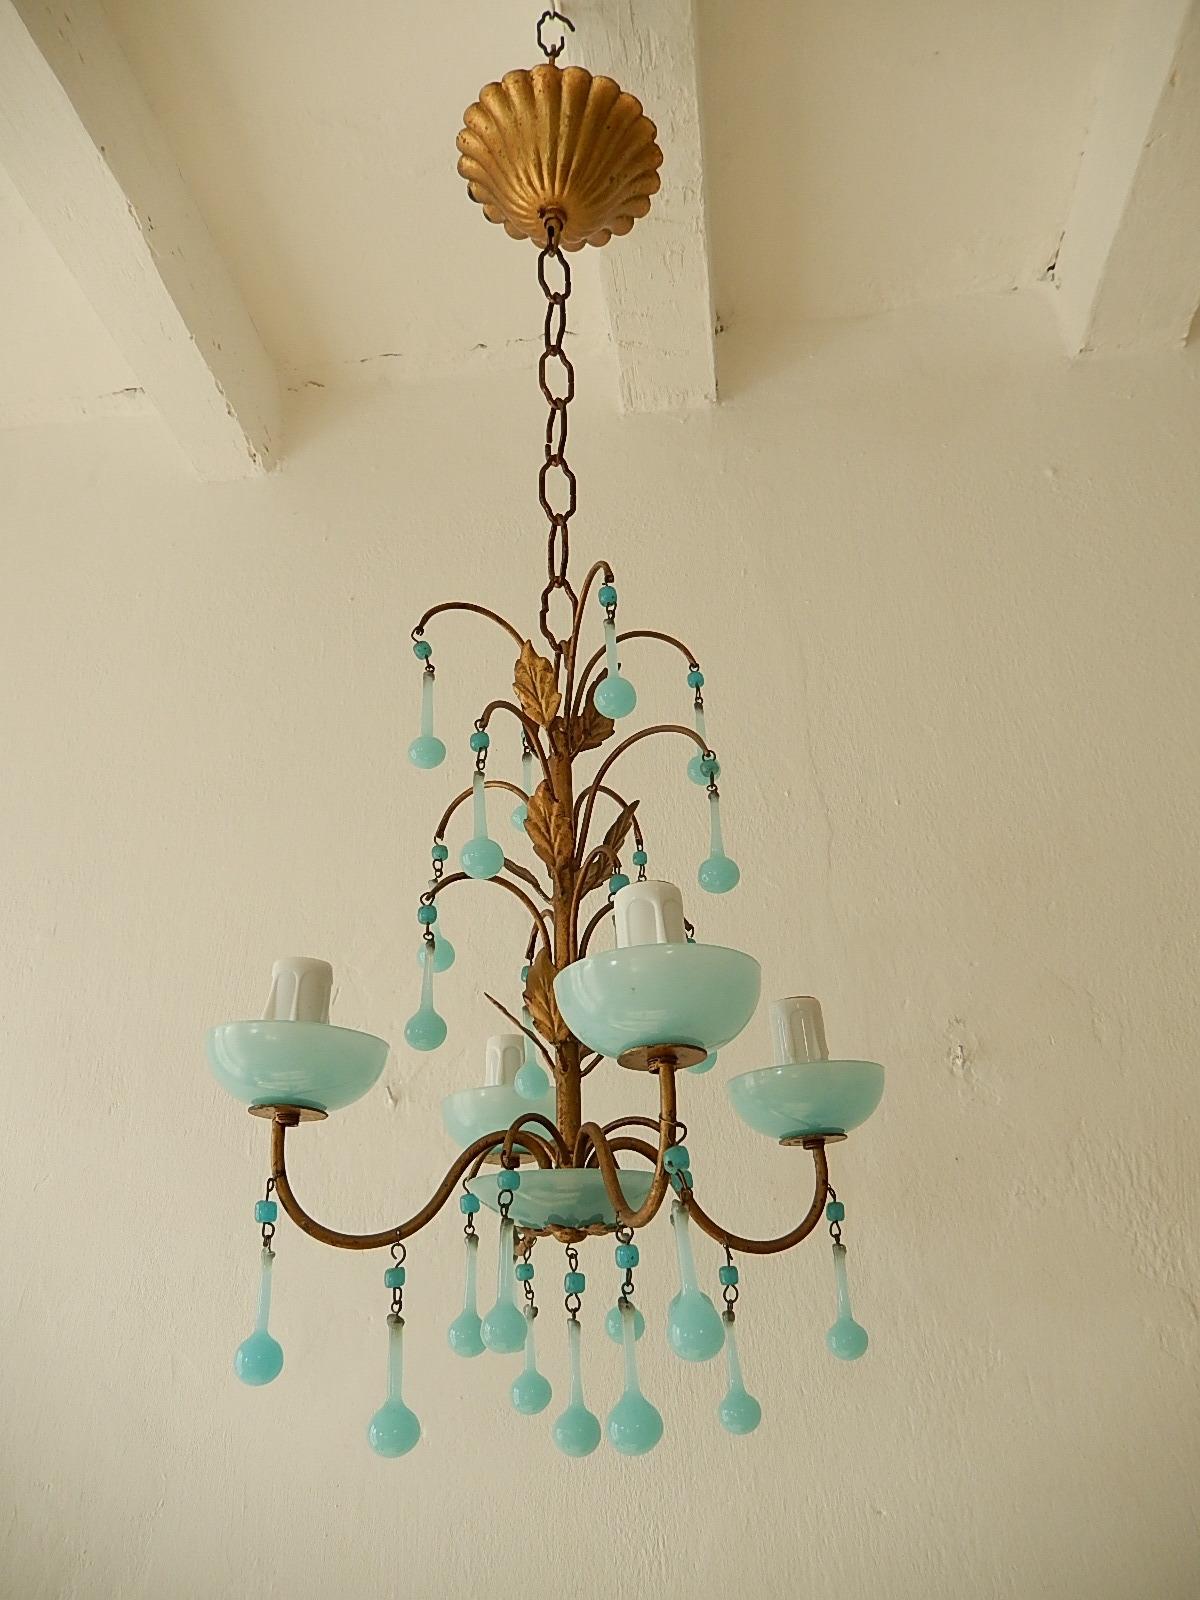 Housing 4-light sitting in blue opaline bobeches. Will be rewired with certified UL US sockets or appropriate sockets for other countries and ready to hang. Gilt metal. Murano blue opaline drops and beads. Another blue bobeche on bottom. Adding